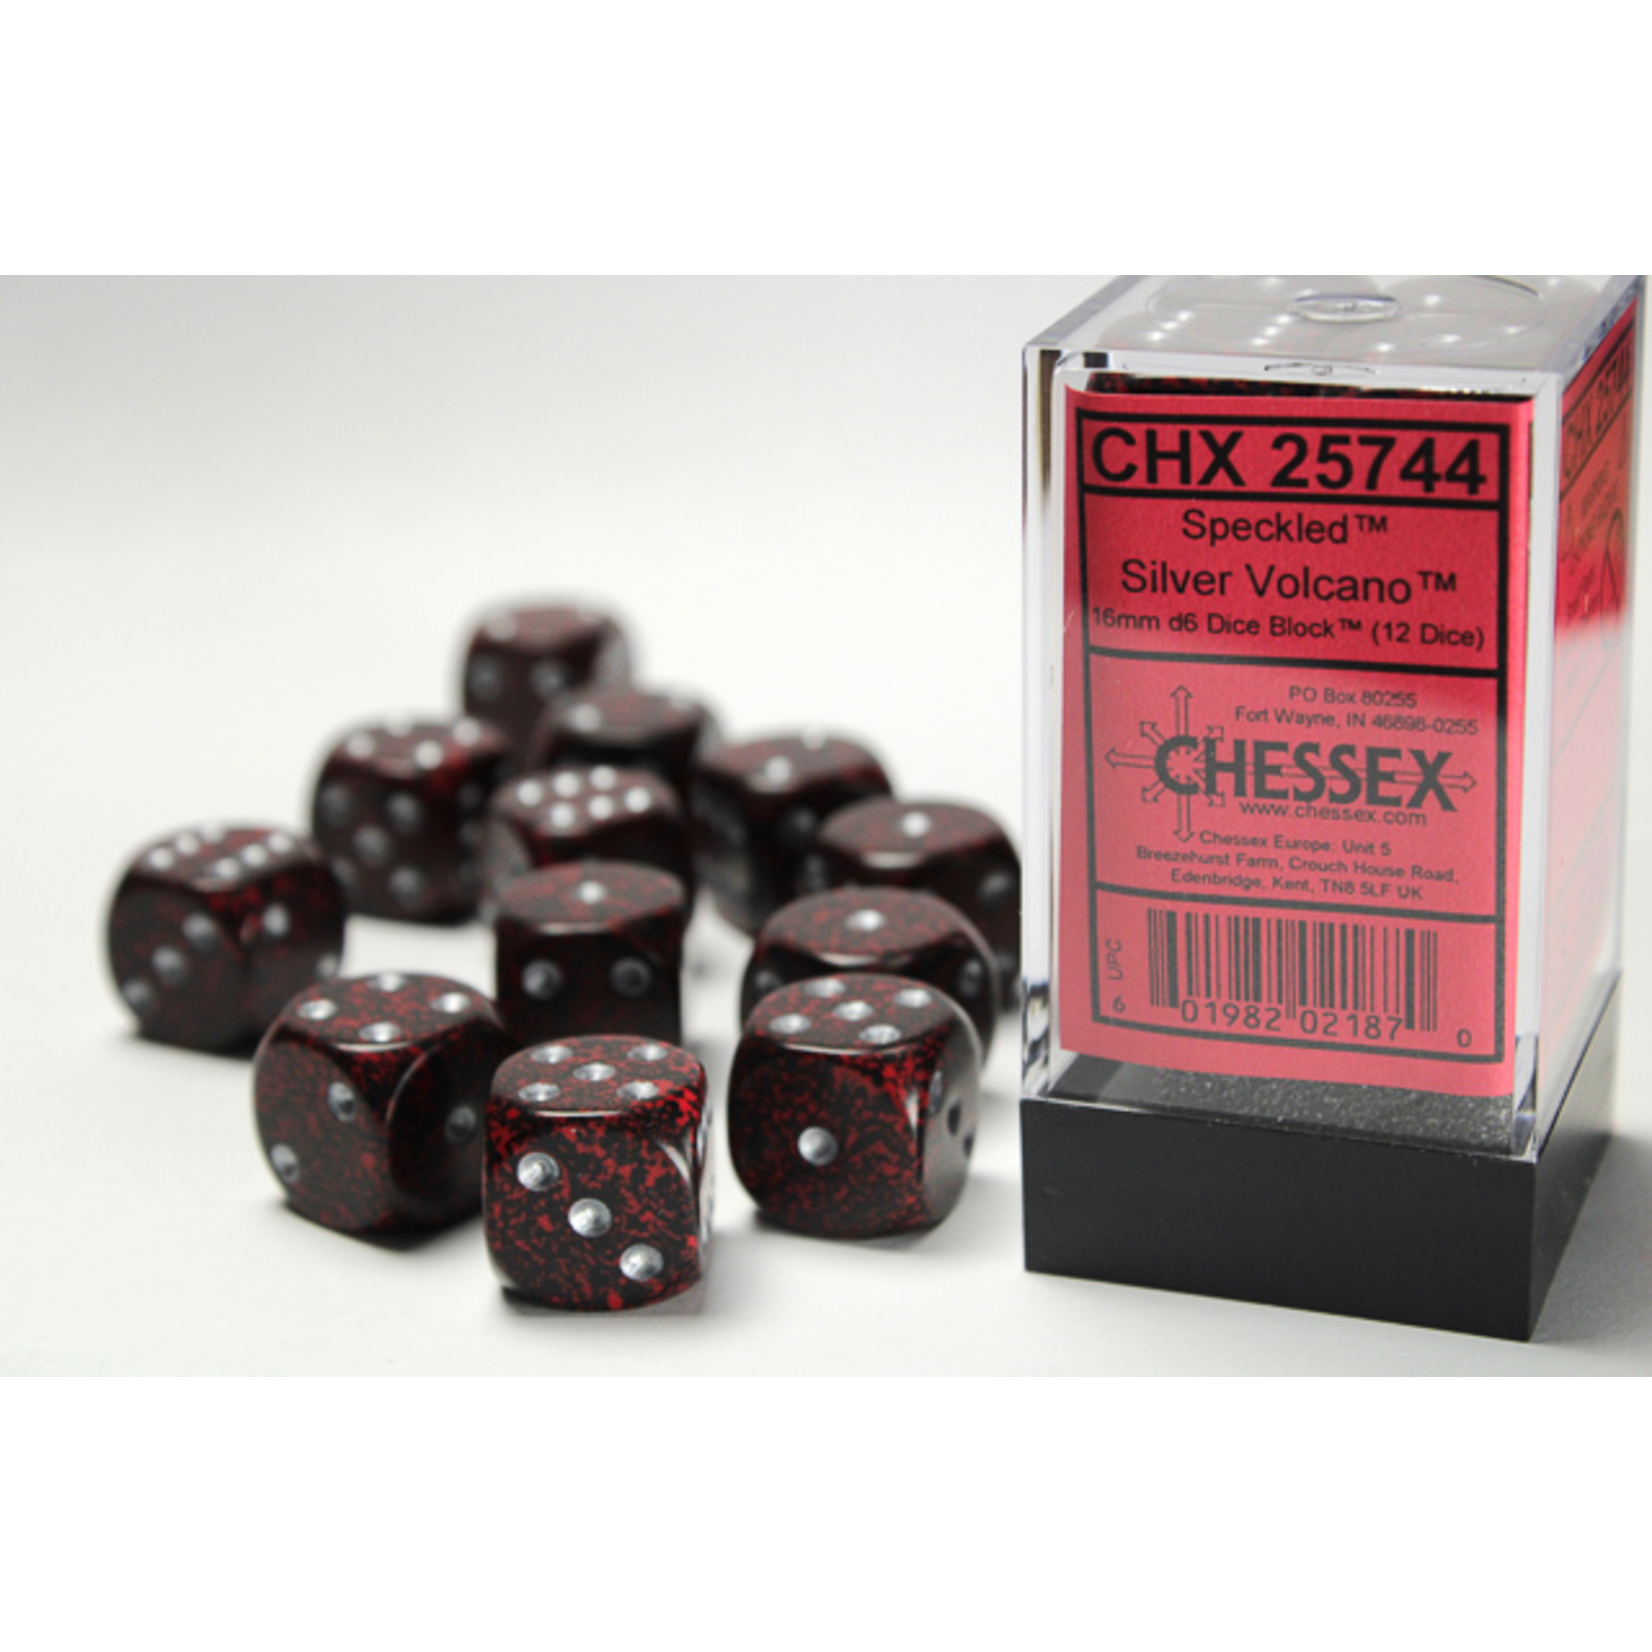 Chessex 12-Piece Dice Set: Speckled Volcano with Silver Pips (16mm, D6s Only)